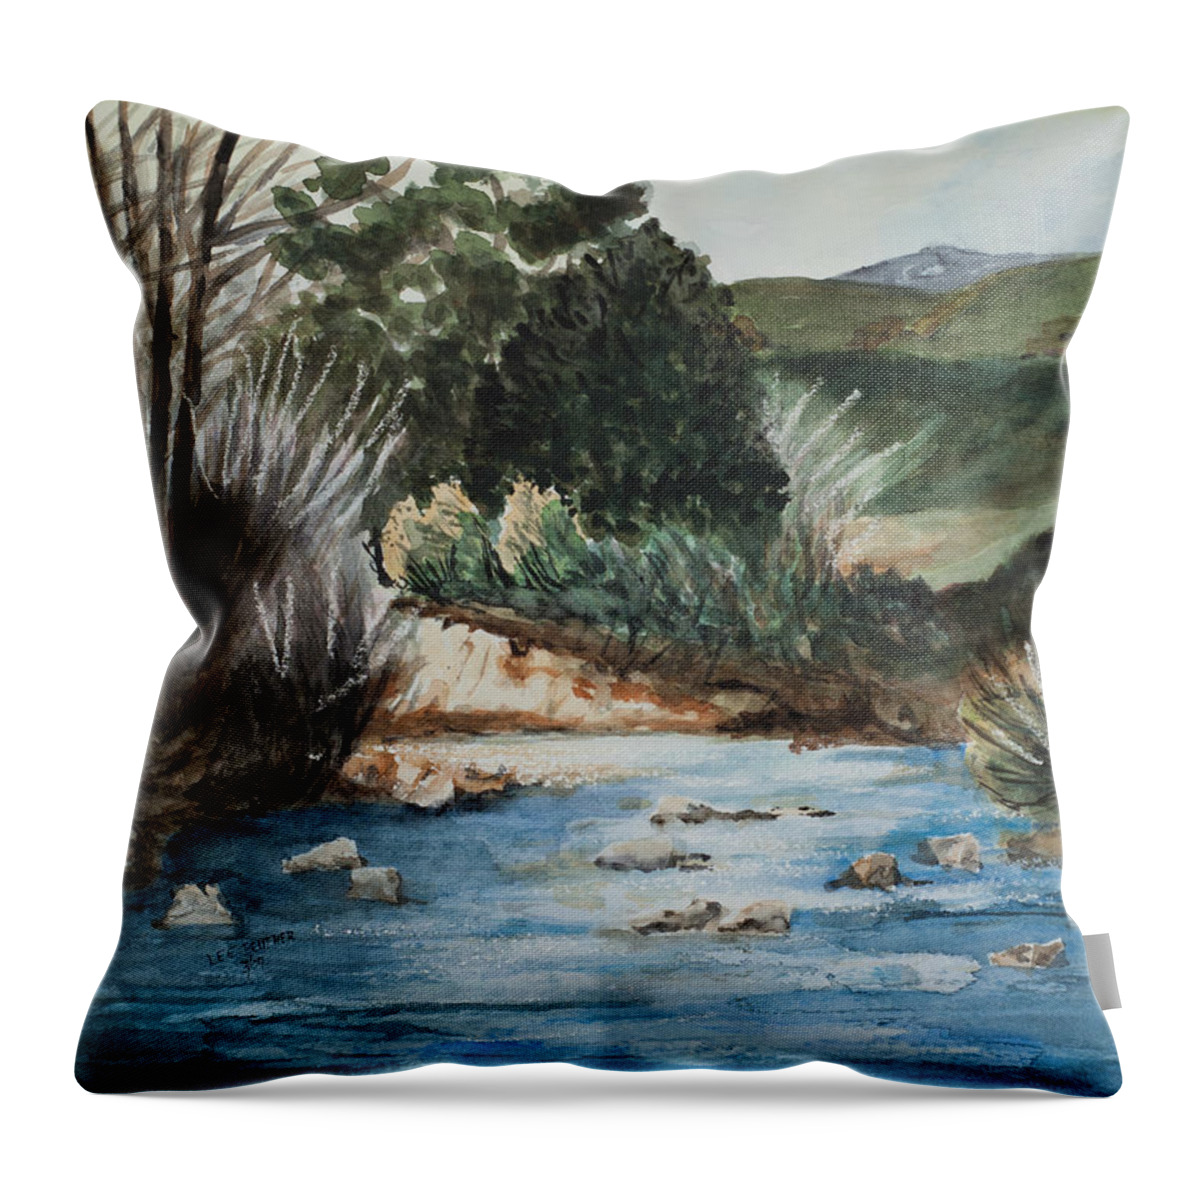 Artwork Throw Pillow featuring the painting Riverscape by Lee Beuther